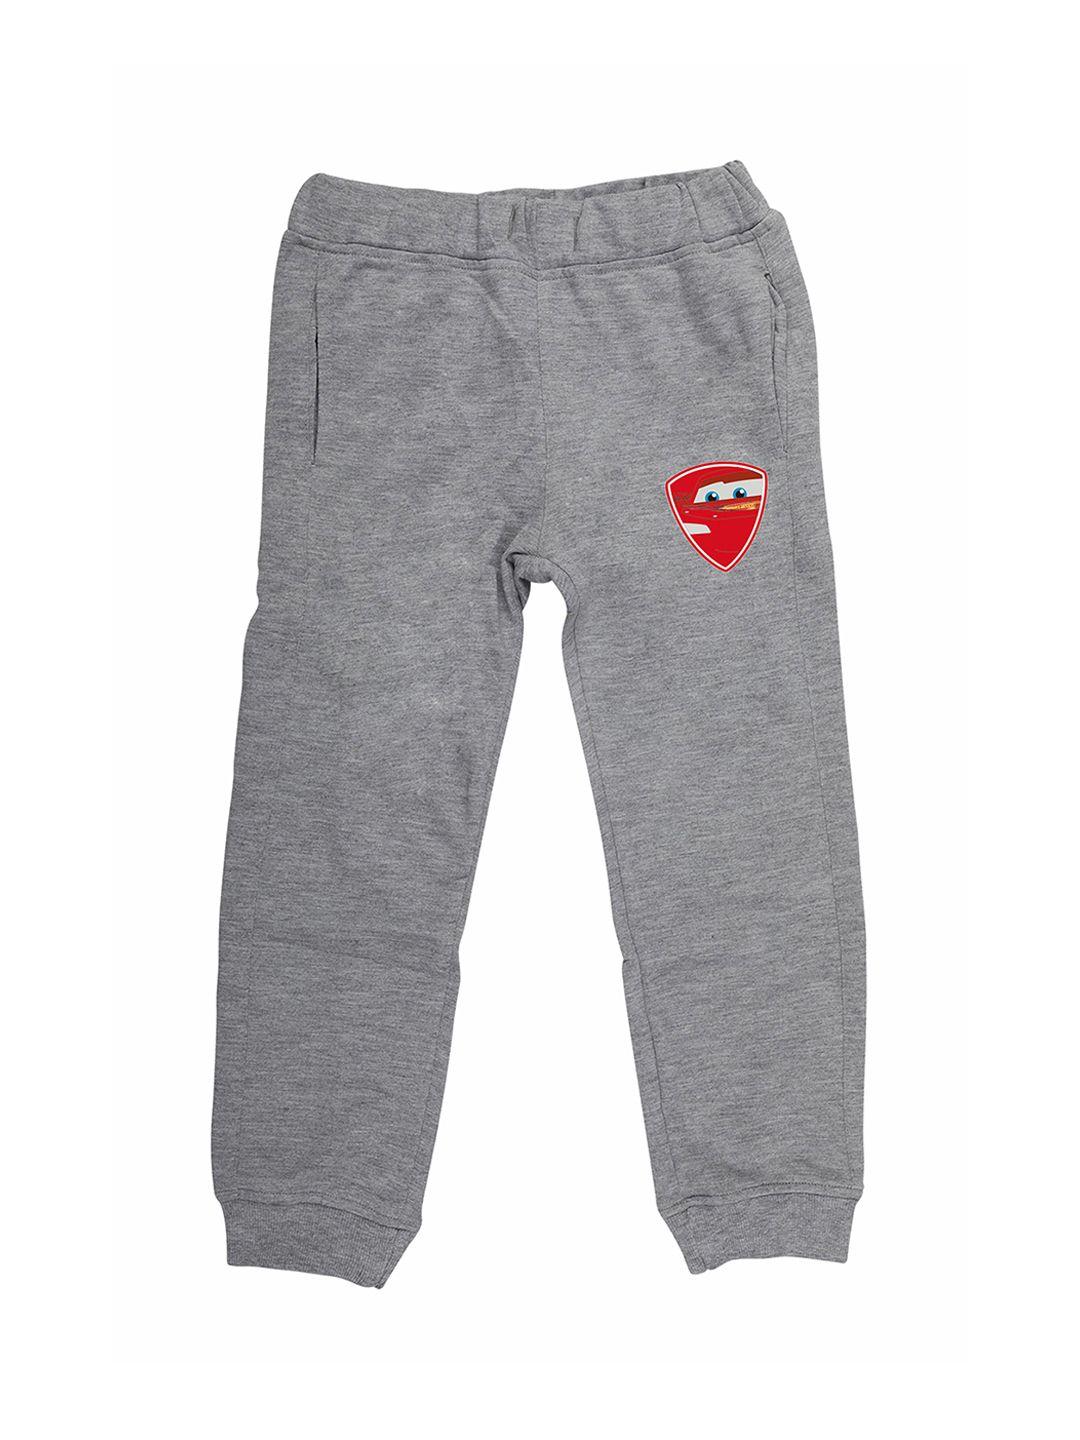 disney by wear your mind grey solid kids joggers